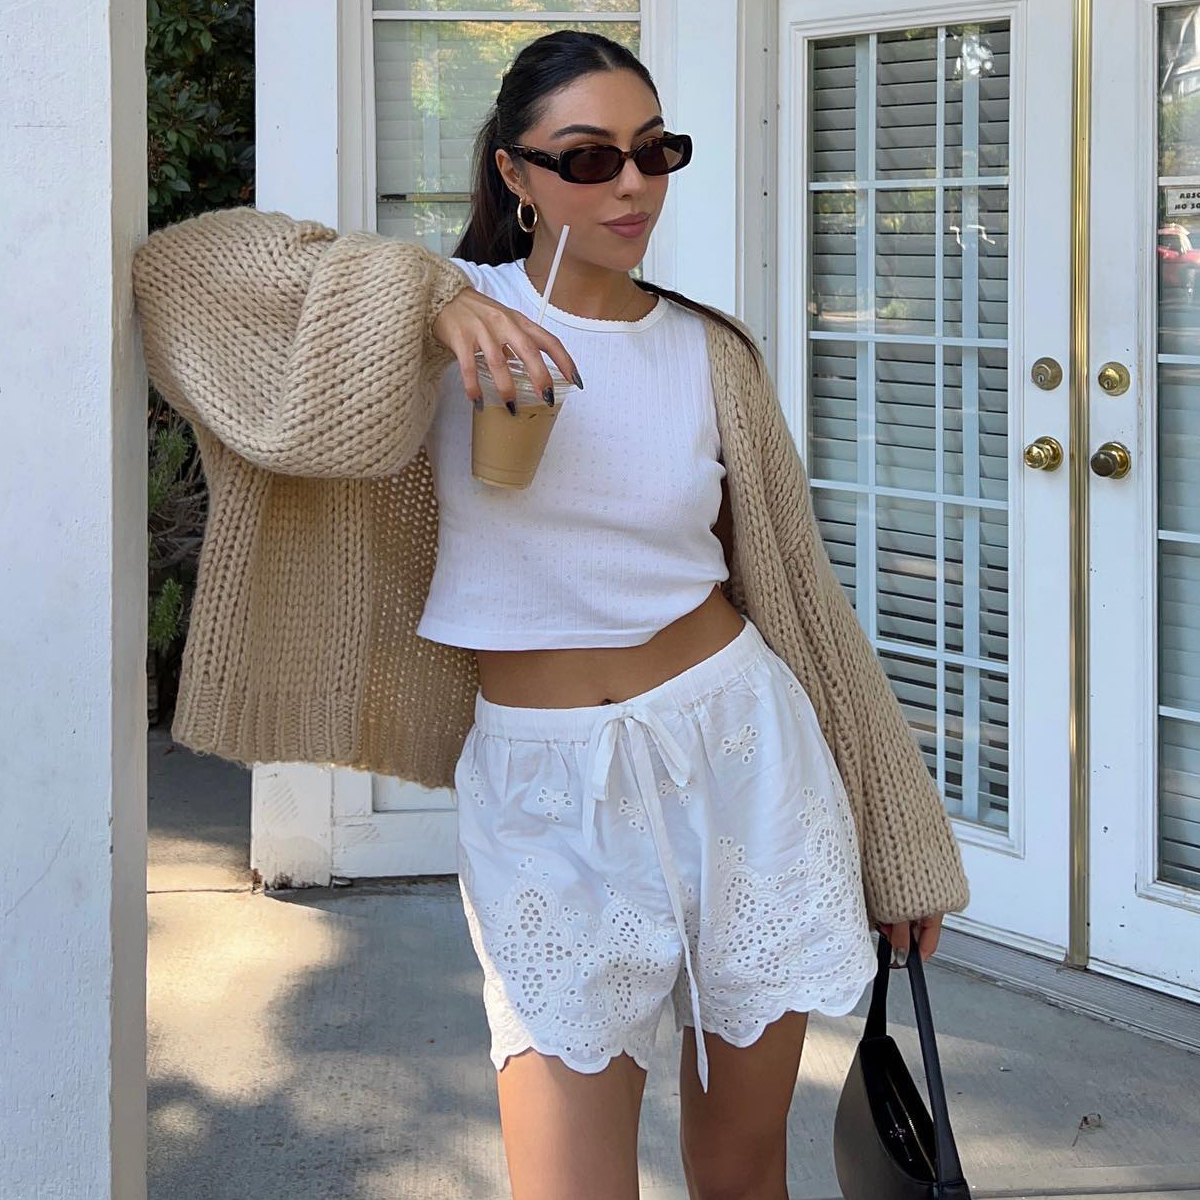 If You're Wearing Any of These 5 Shorts Trends, I Know You're a Fashion Person